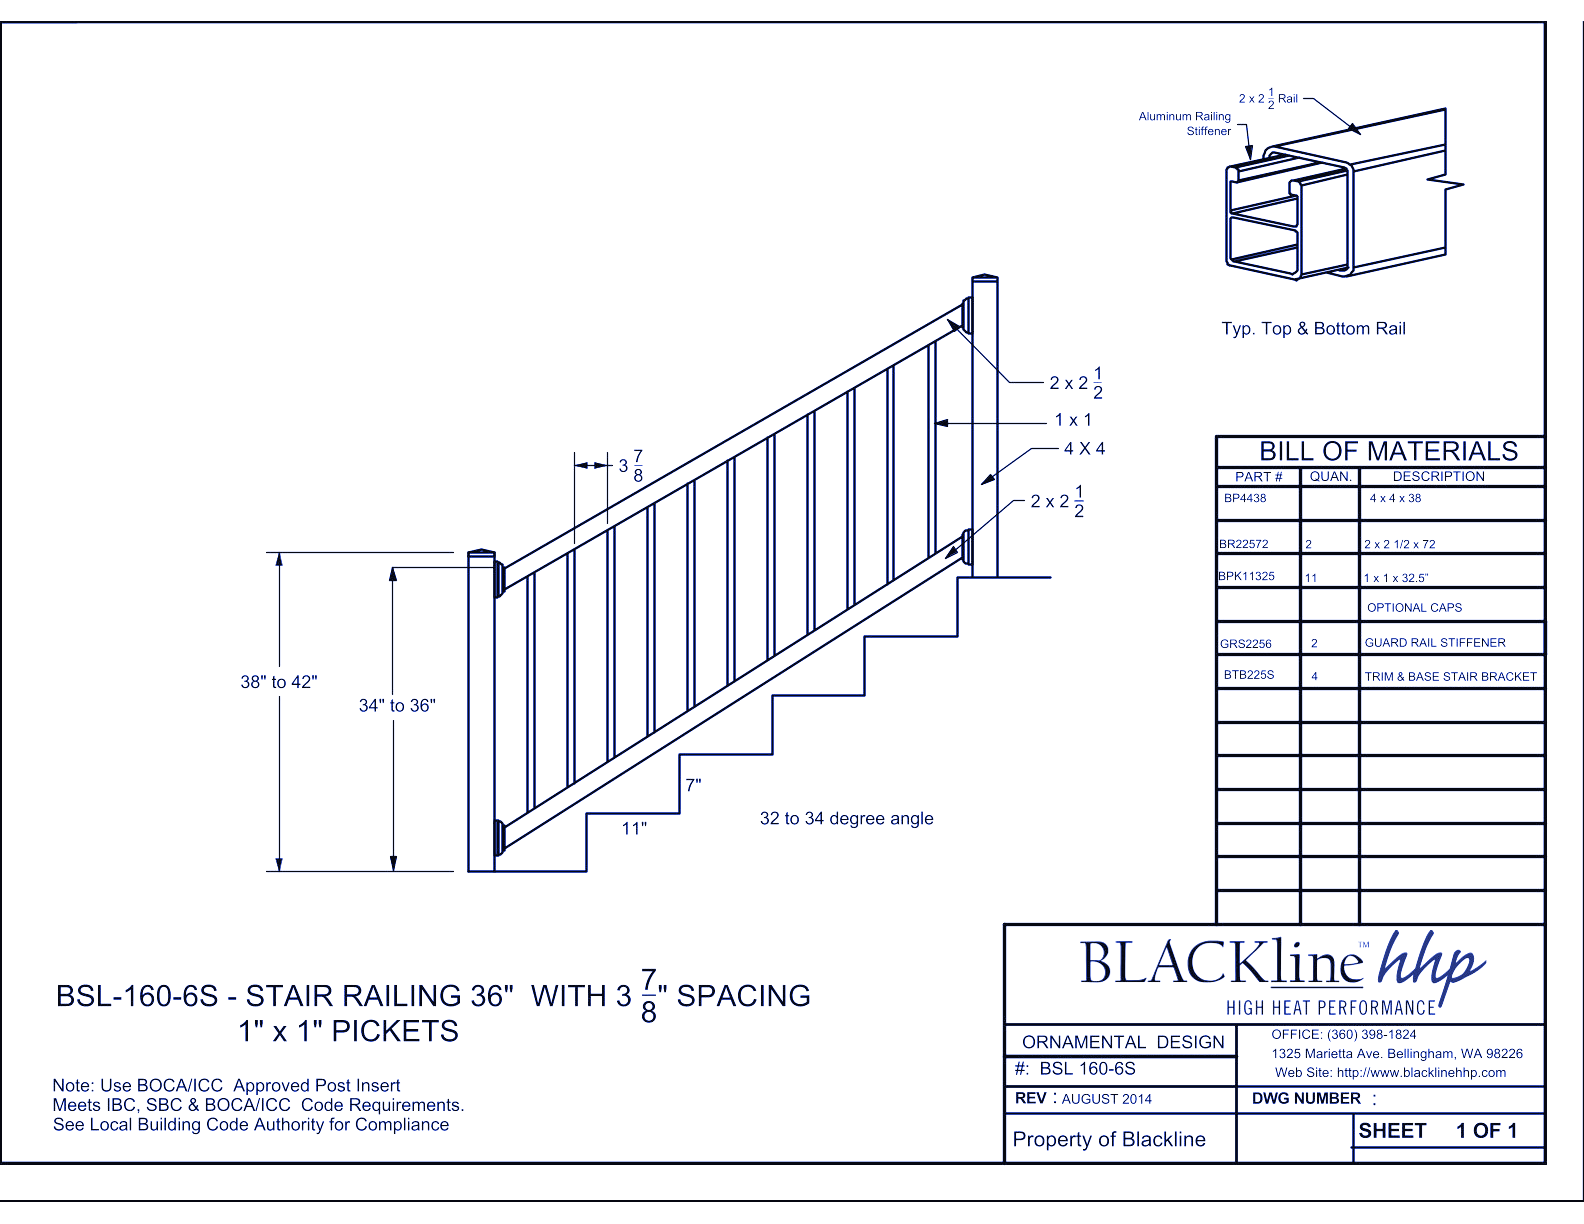 BSL-160-6S: Stair Railing 36" with 3 7/8" Spacing - 1" x 1" Pickets